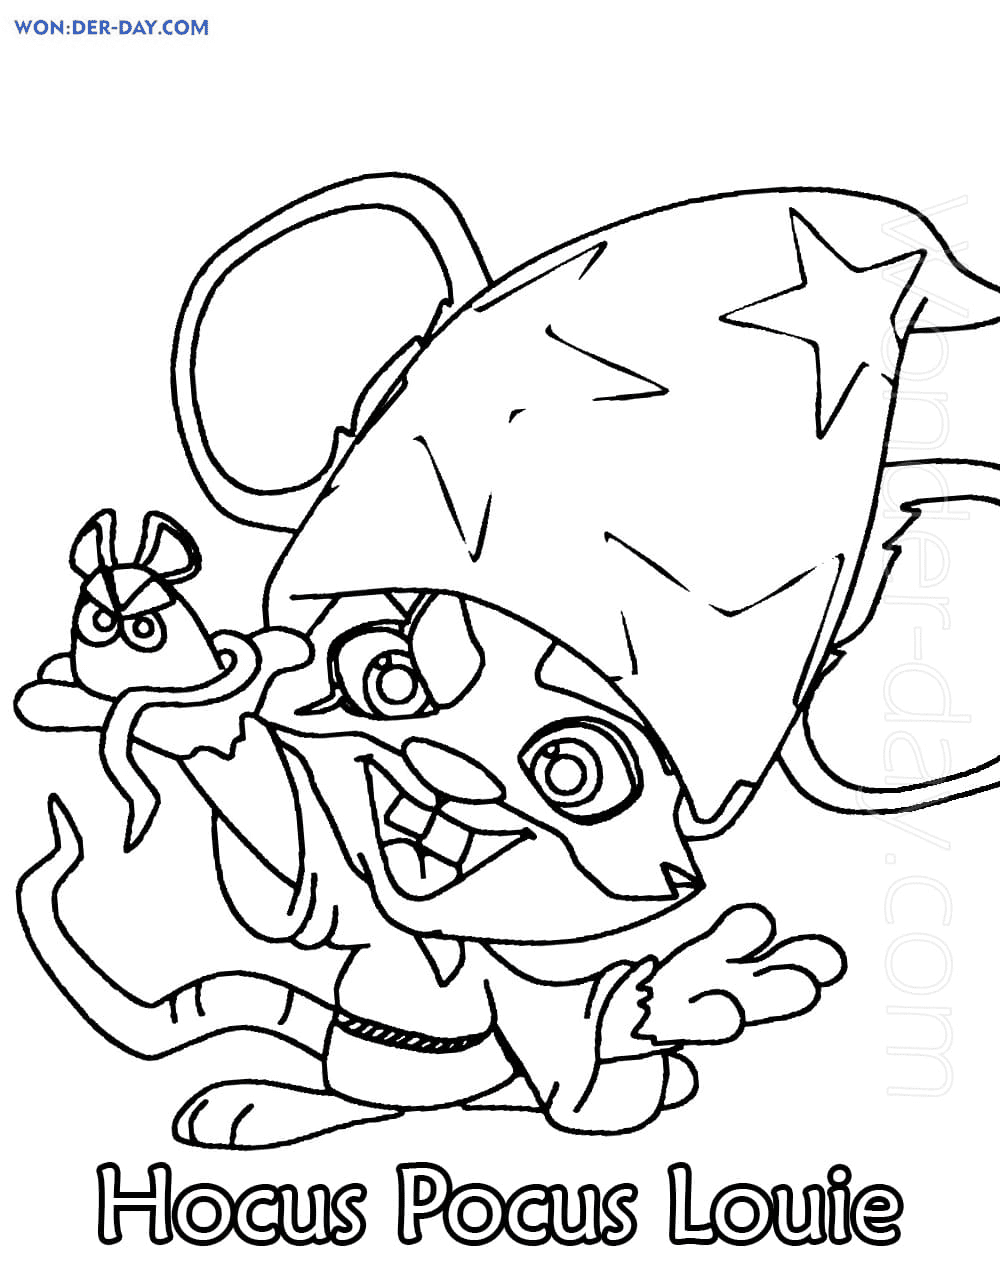 Hocus Pocus Louie Zooba Coloring Pages